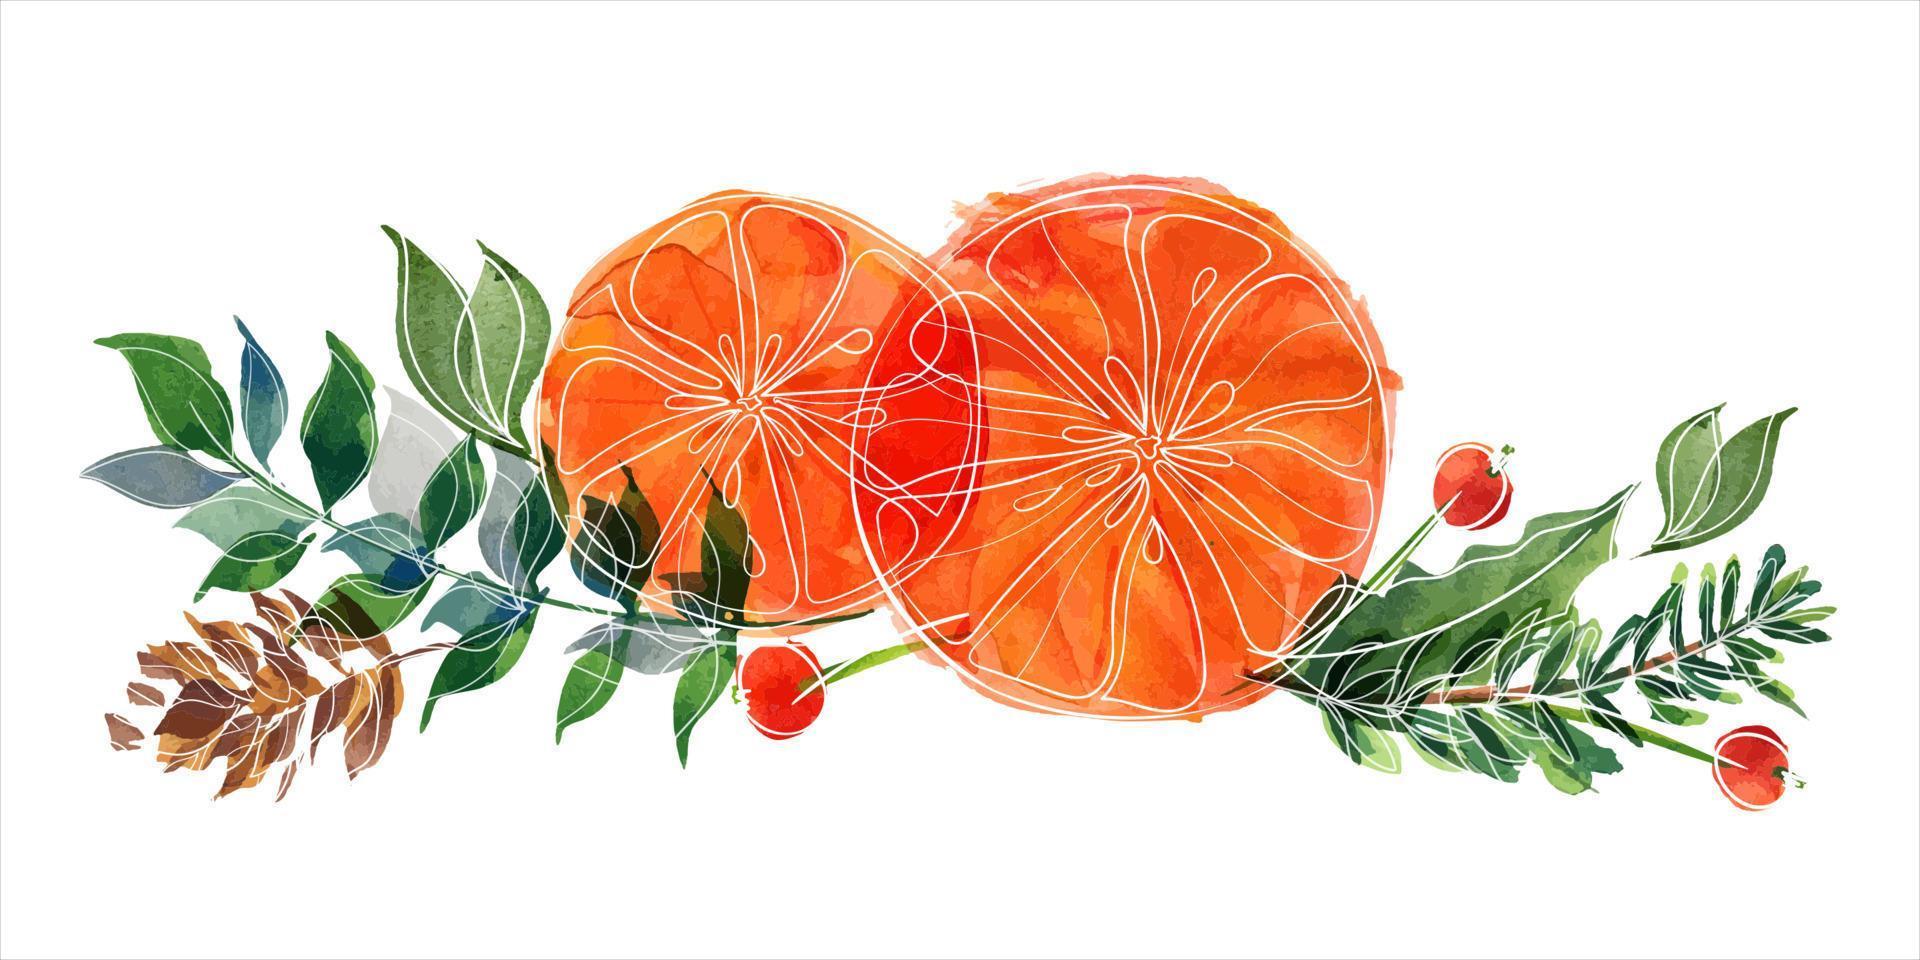 Christmas bouquet with oranges and holly branches vector